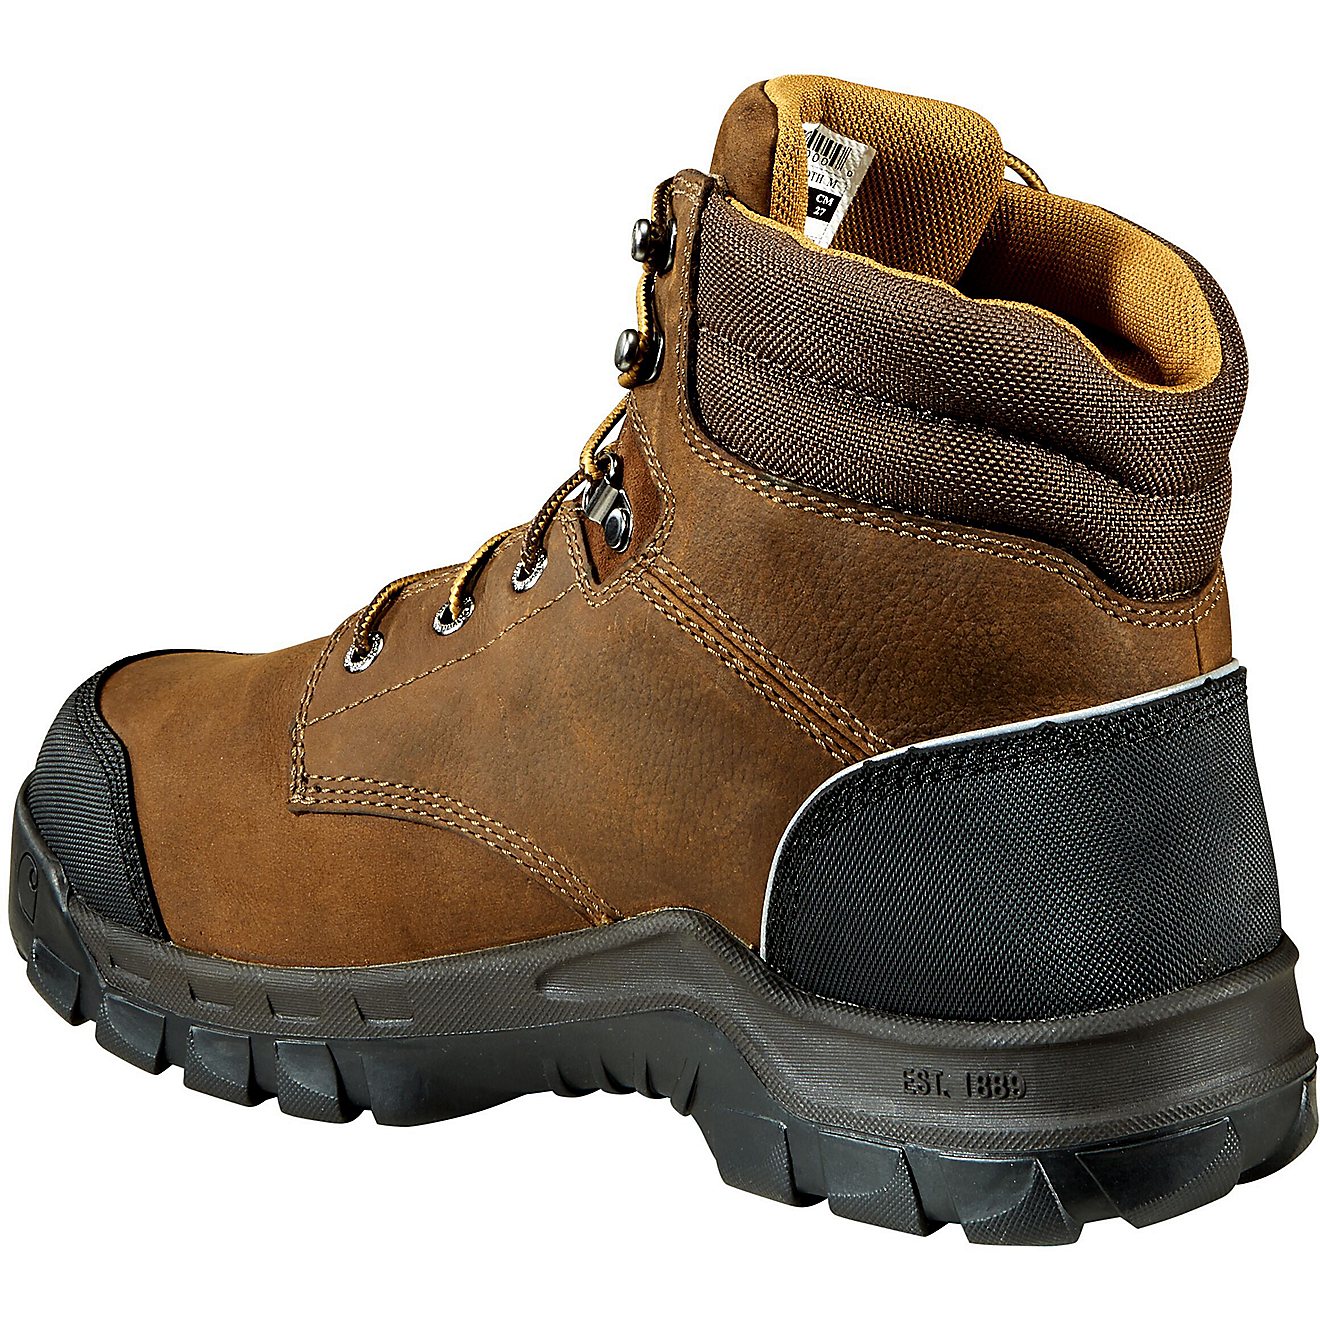 Carhartt Men's Rugged Flex Met Guard Composite Toe Lace Up Work Boots                                                            - view number 2